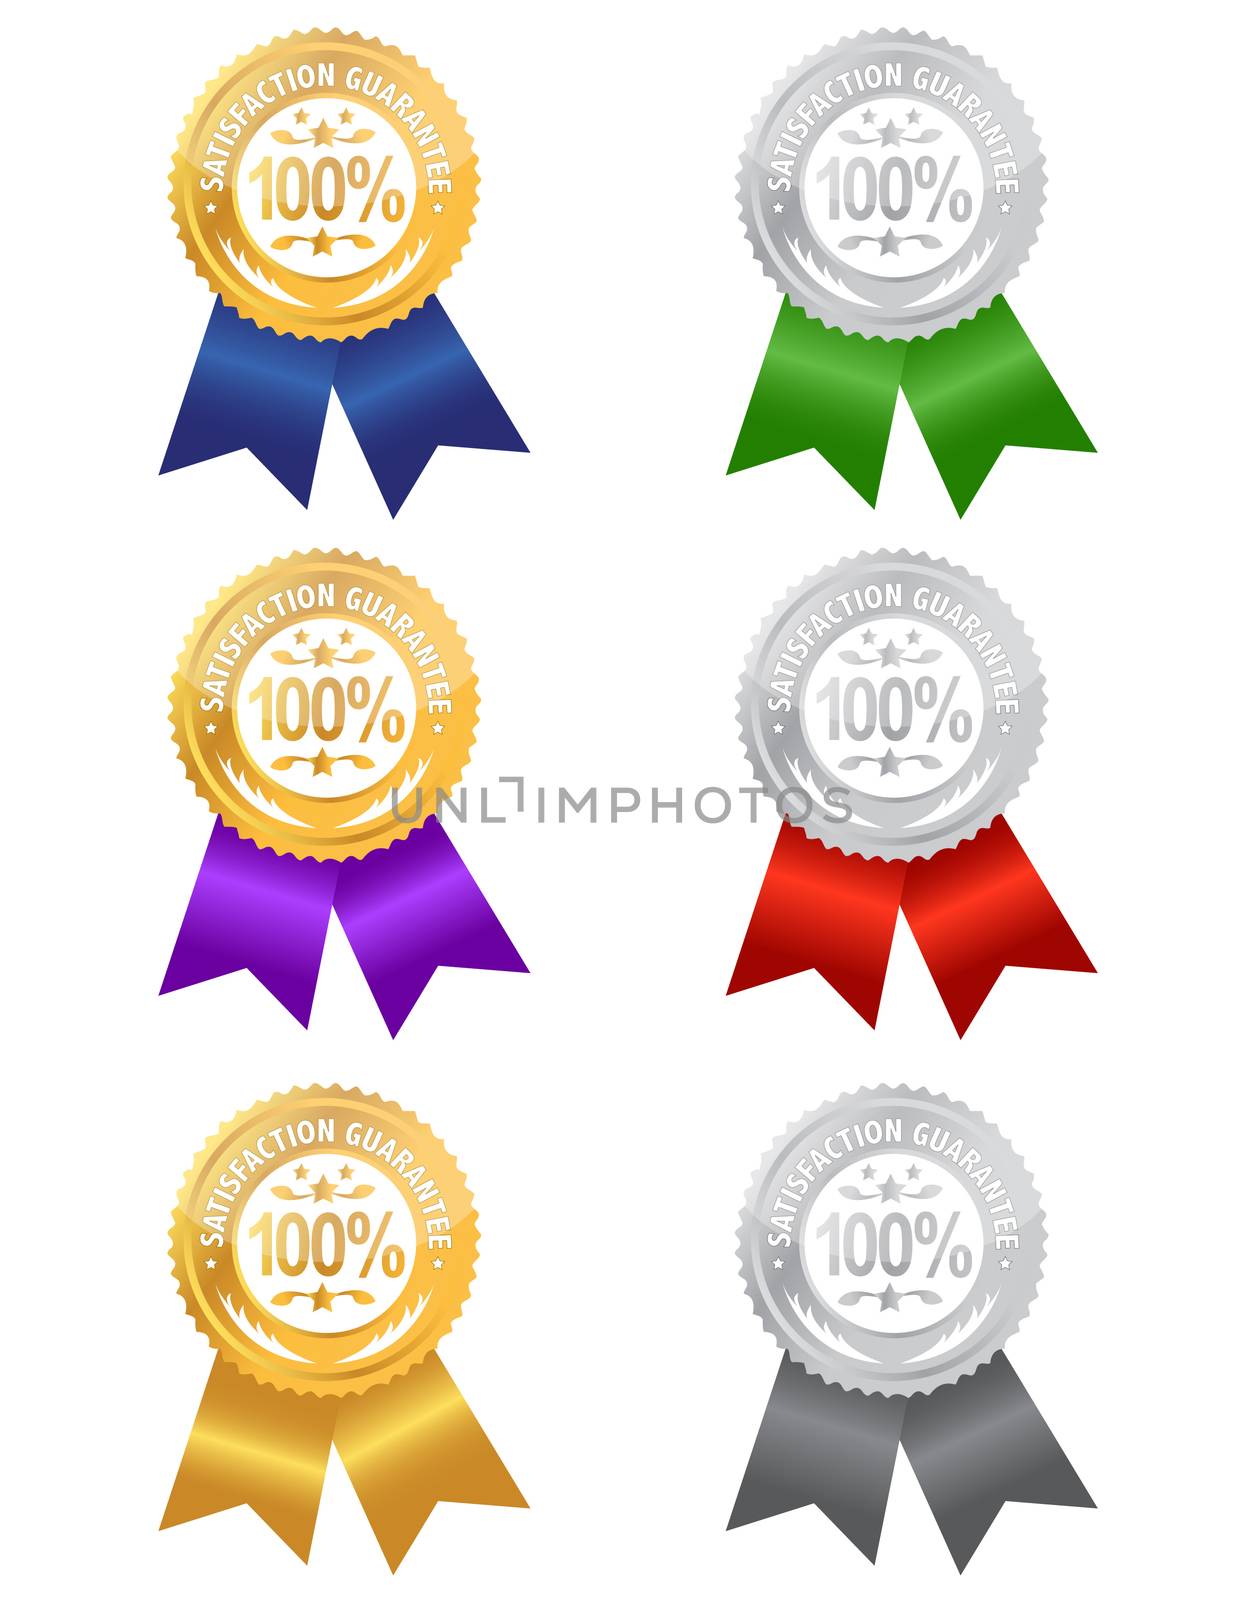 Illustration of different satisfaction guarantee ribbons